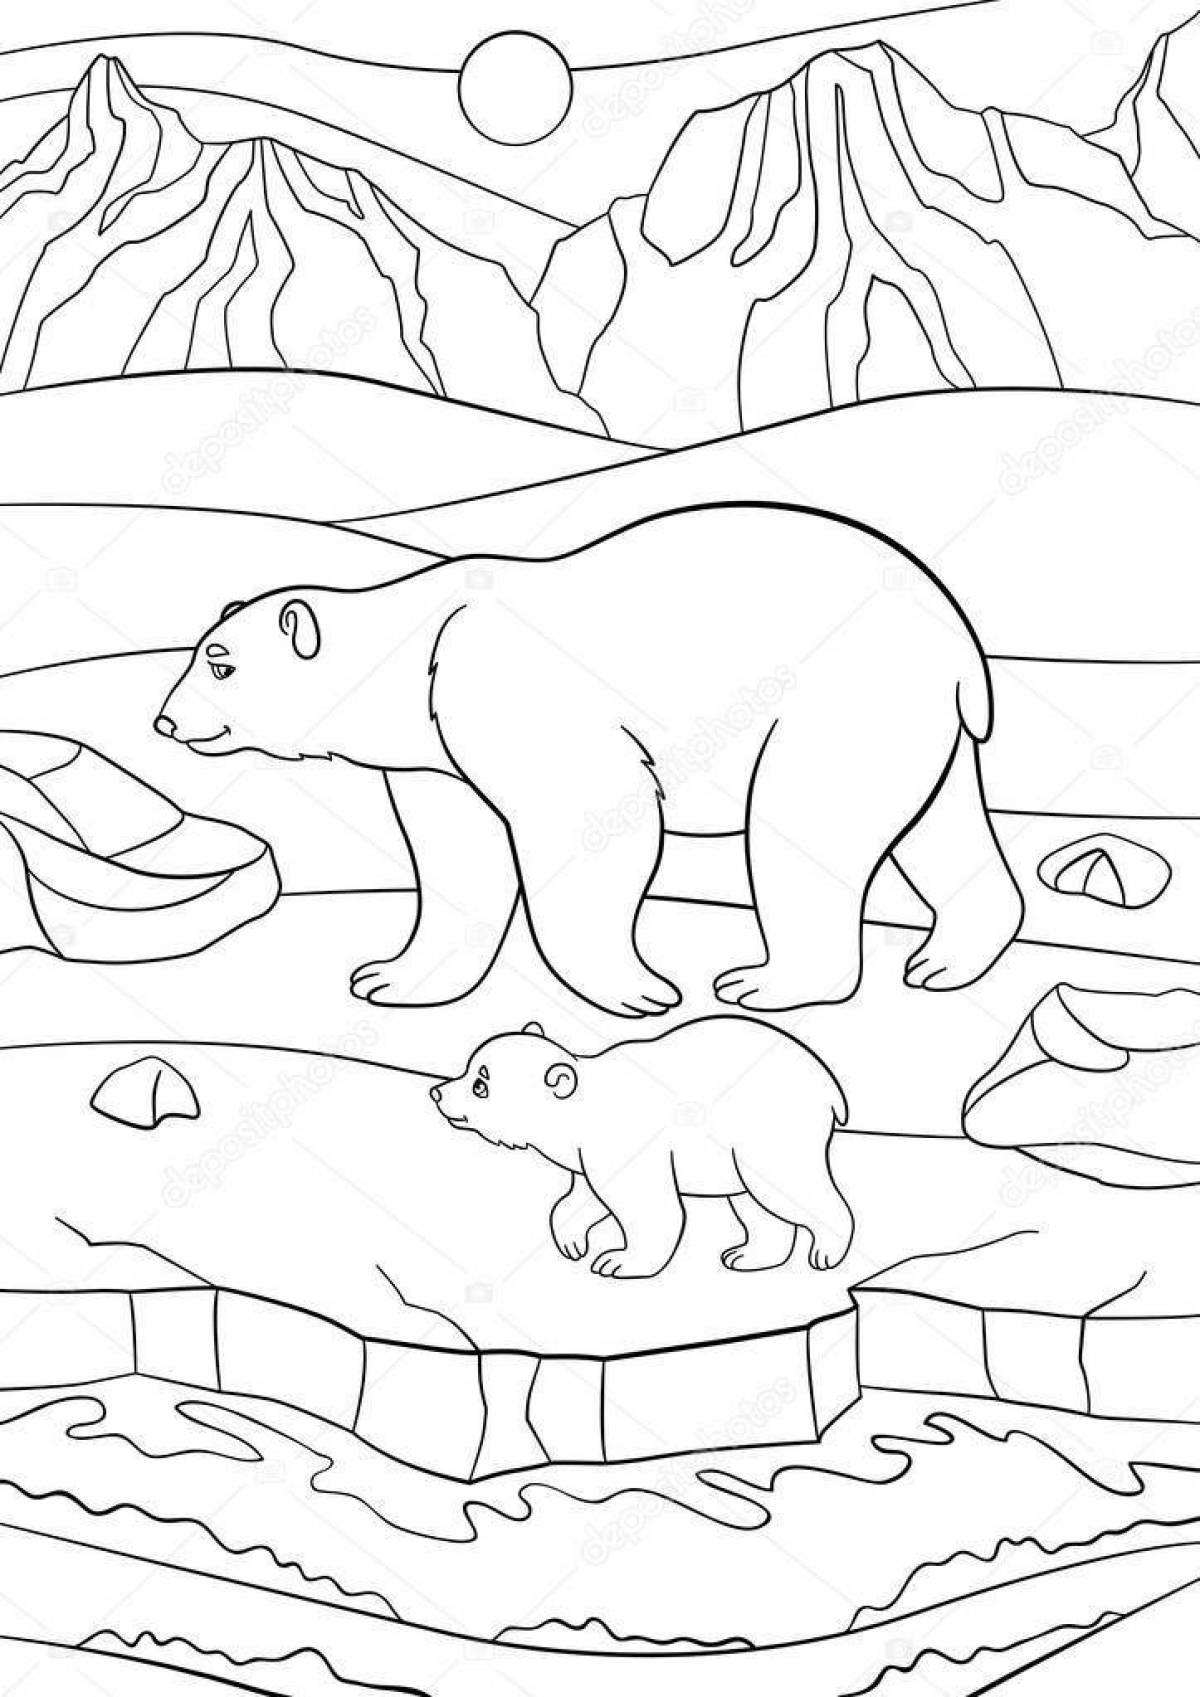 Coloring book playful bear in the north